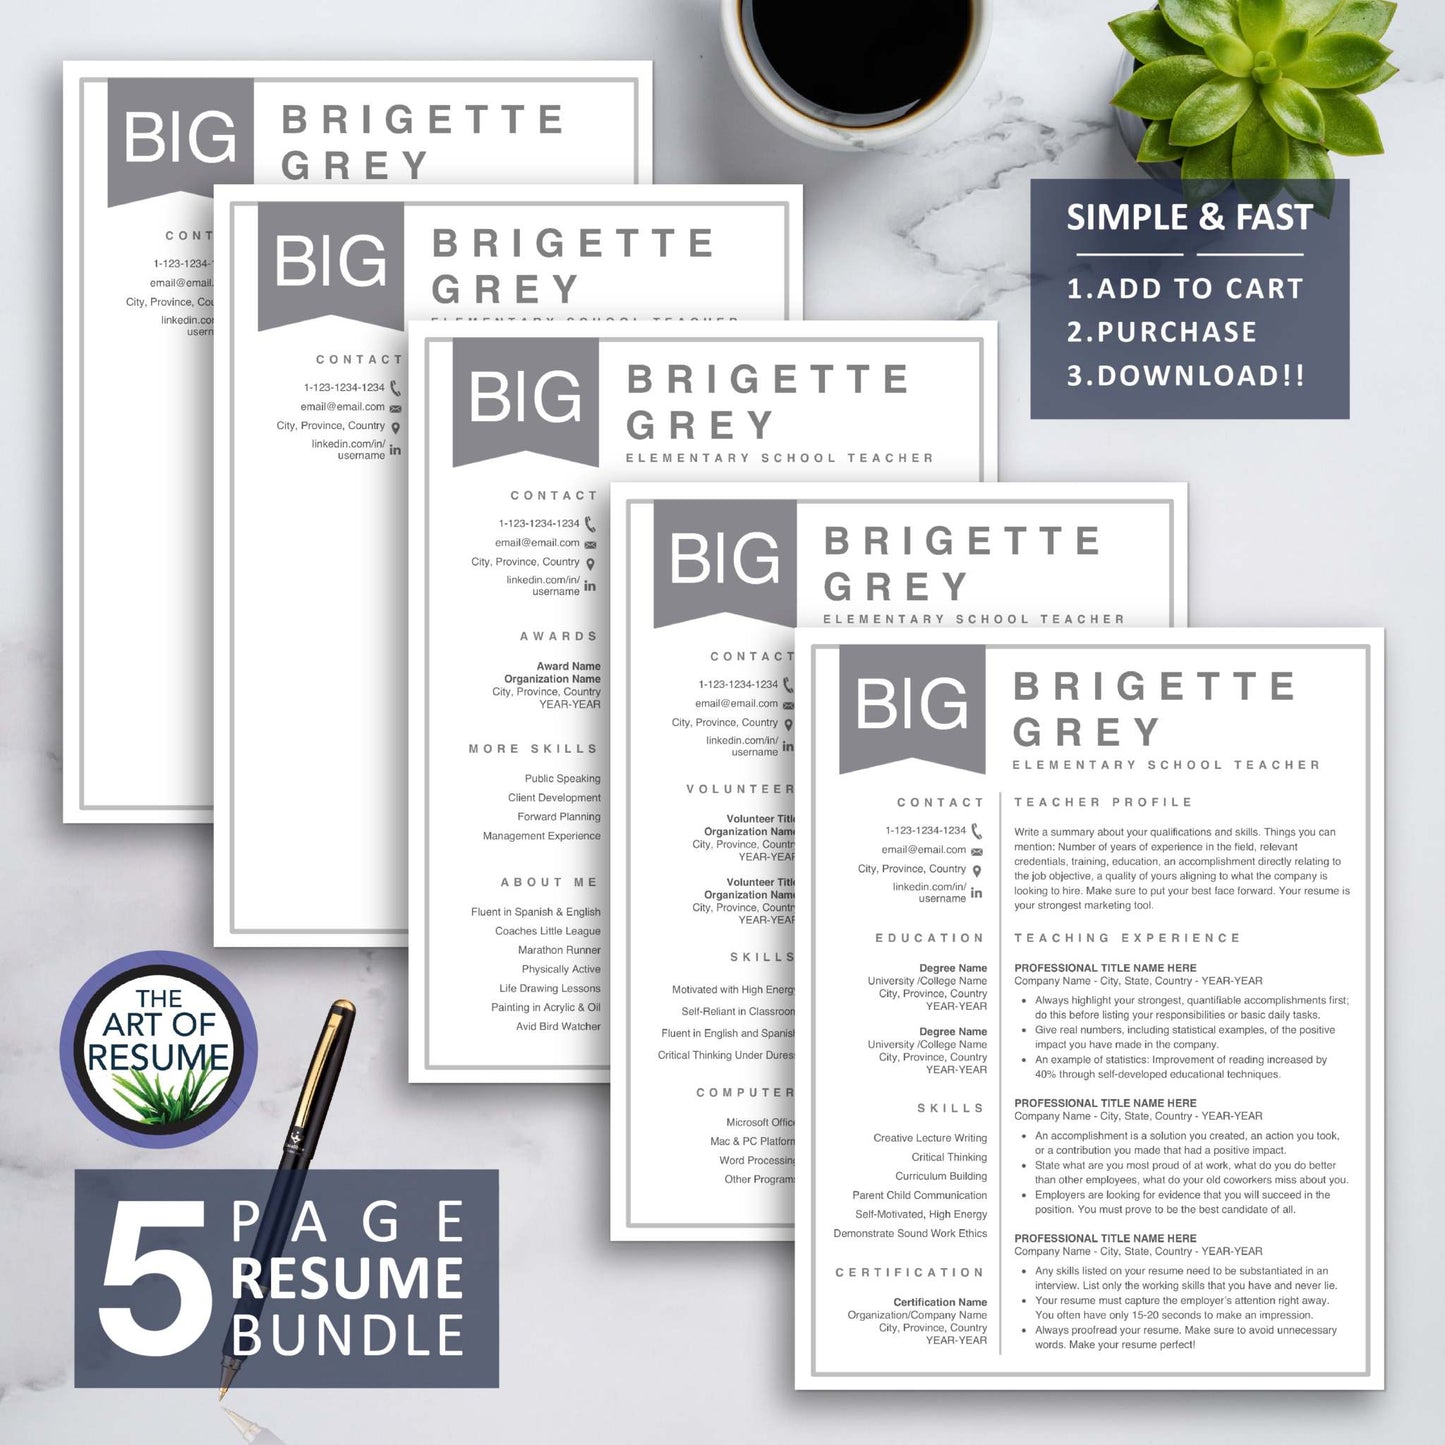 5 Page Resume Bundle - The Art of Resume - Curriculum Vitae, Resumes, CV Templates for Teacher with Free Cover Letter